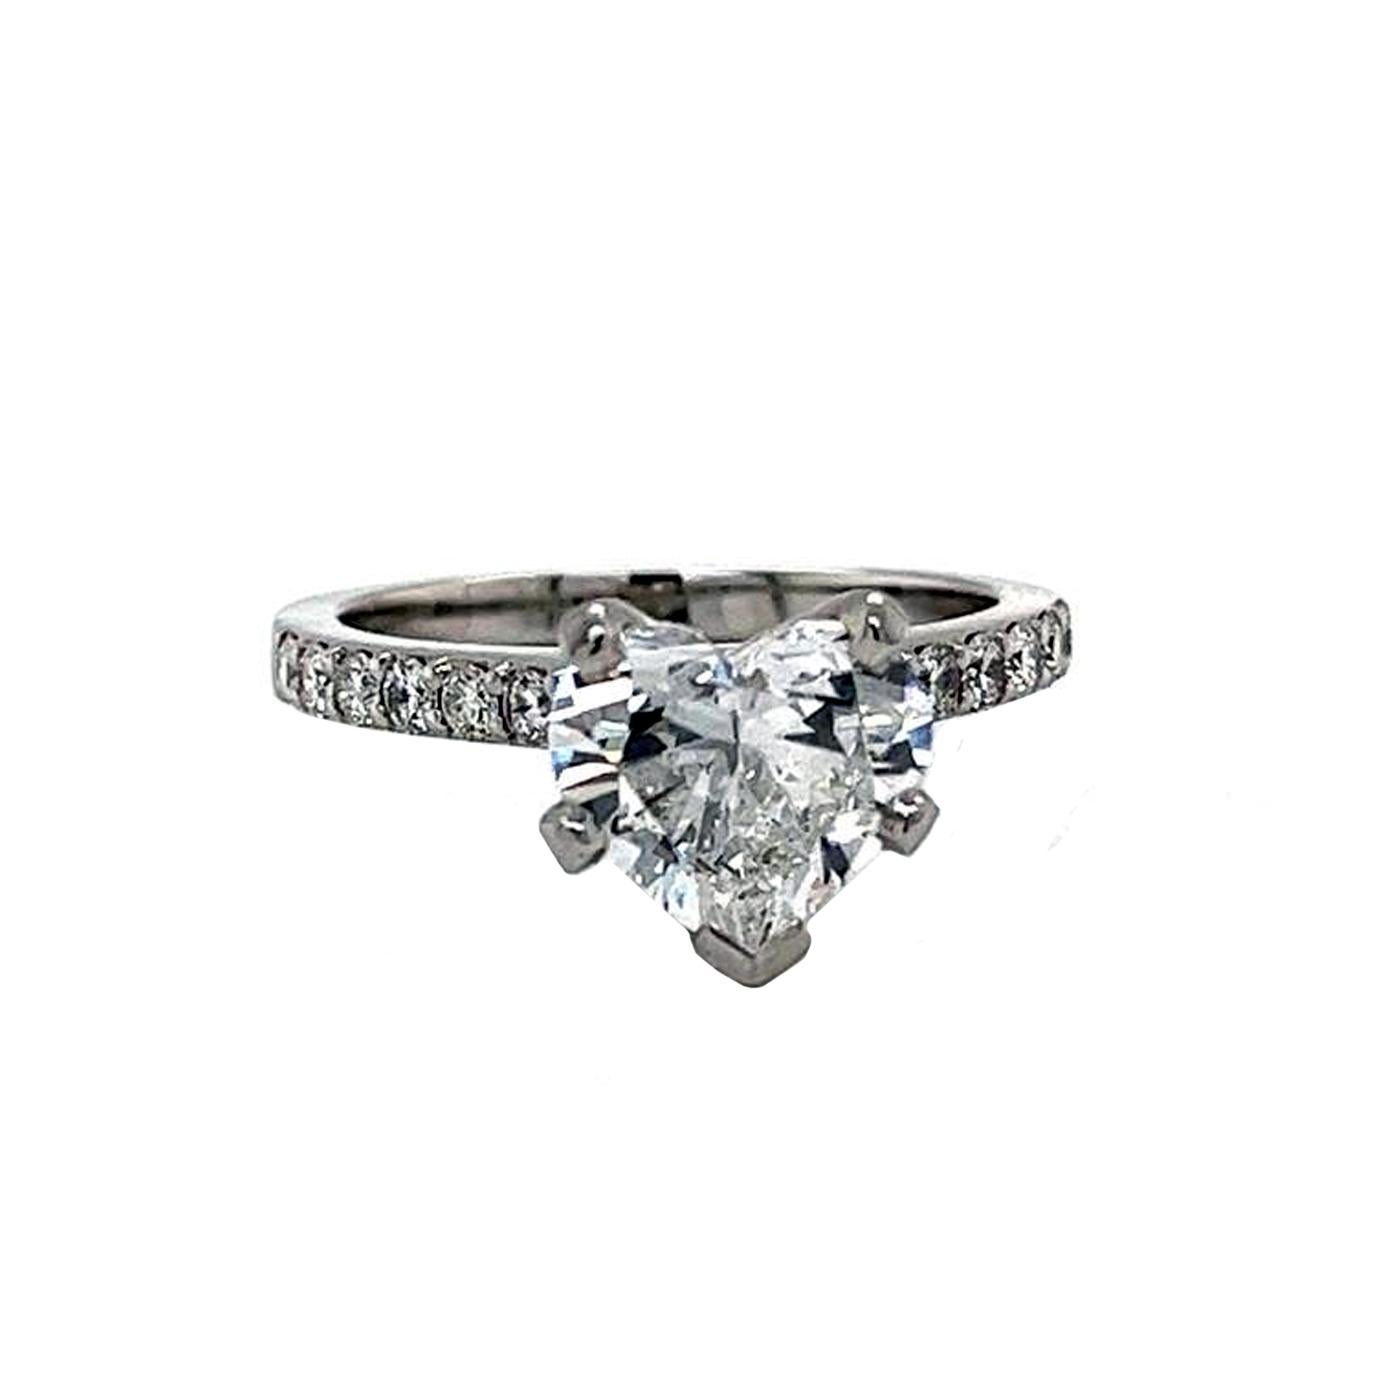 One lady's platinum (stamped) and diamond ring. The brightly polished ring is mounted is cast/assemble manufactured of diamond-embellished cathedral shoulders design.

The ring contains one heart-cut diamond. The weight is 2.60 carats, The clarity